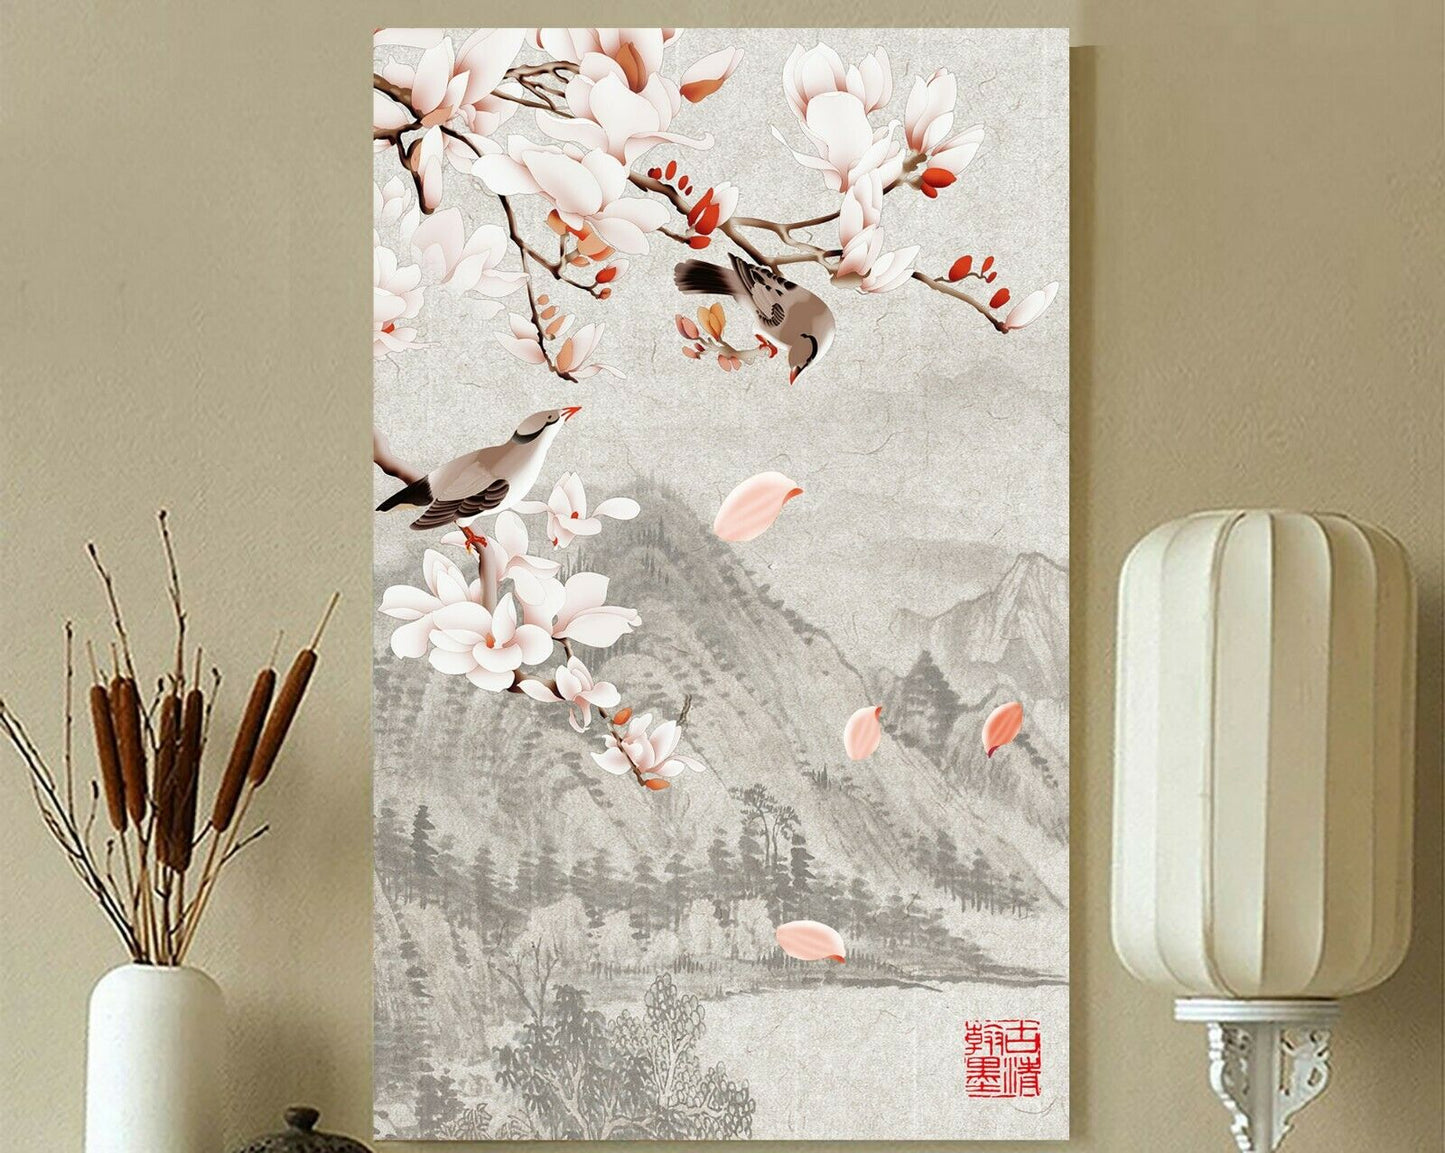 Neo-Chinese Style Framed Canvas Prints Birds Flowers Mountains Art Home Decor